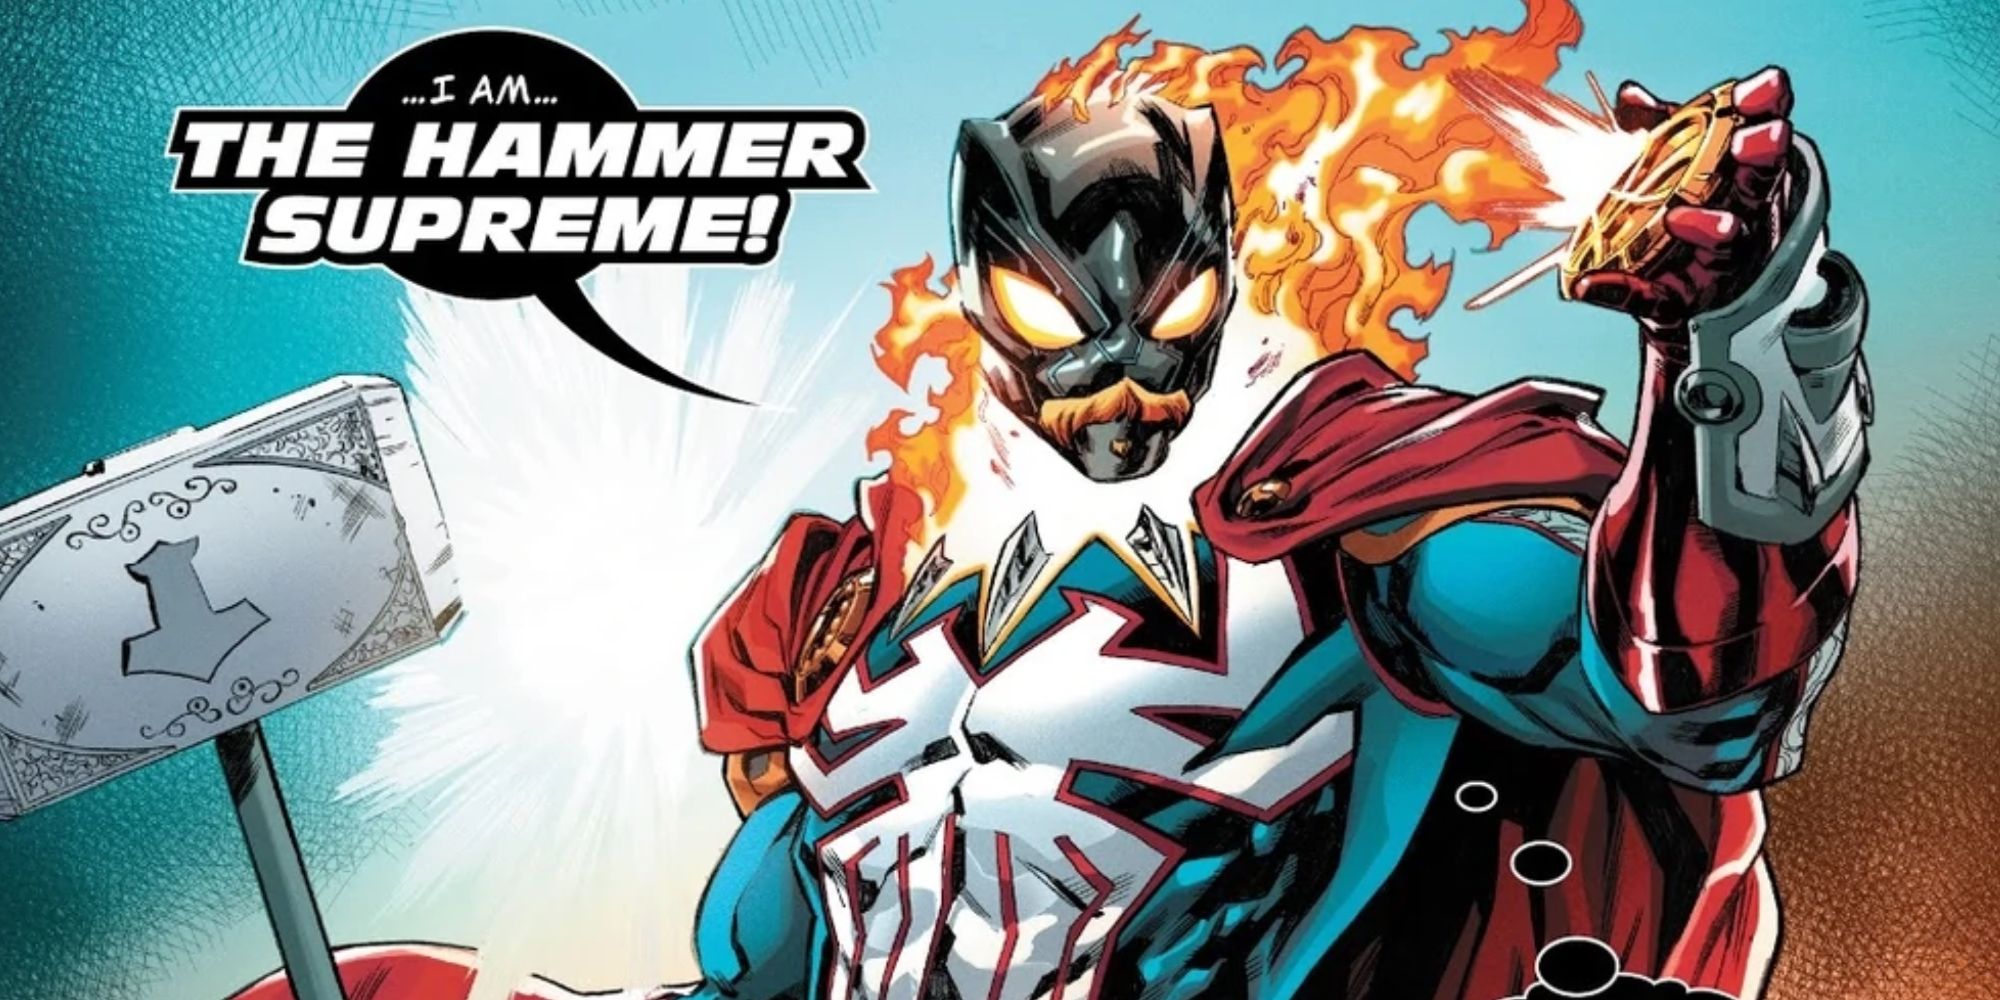 The Hammer Supreme uses his powers in Marvel Comics.